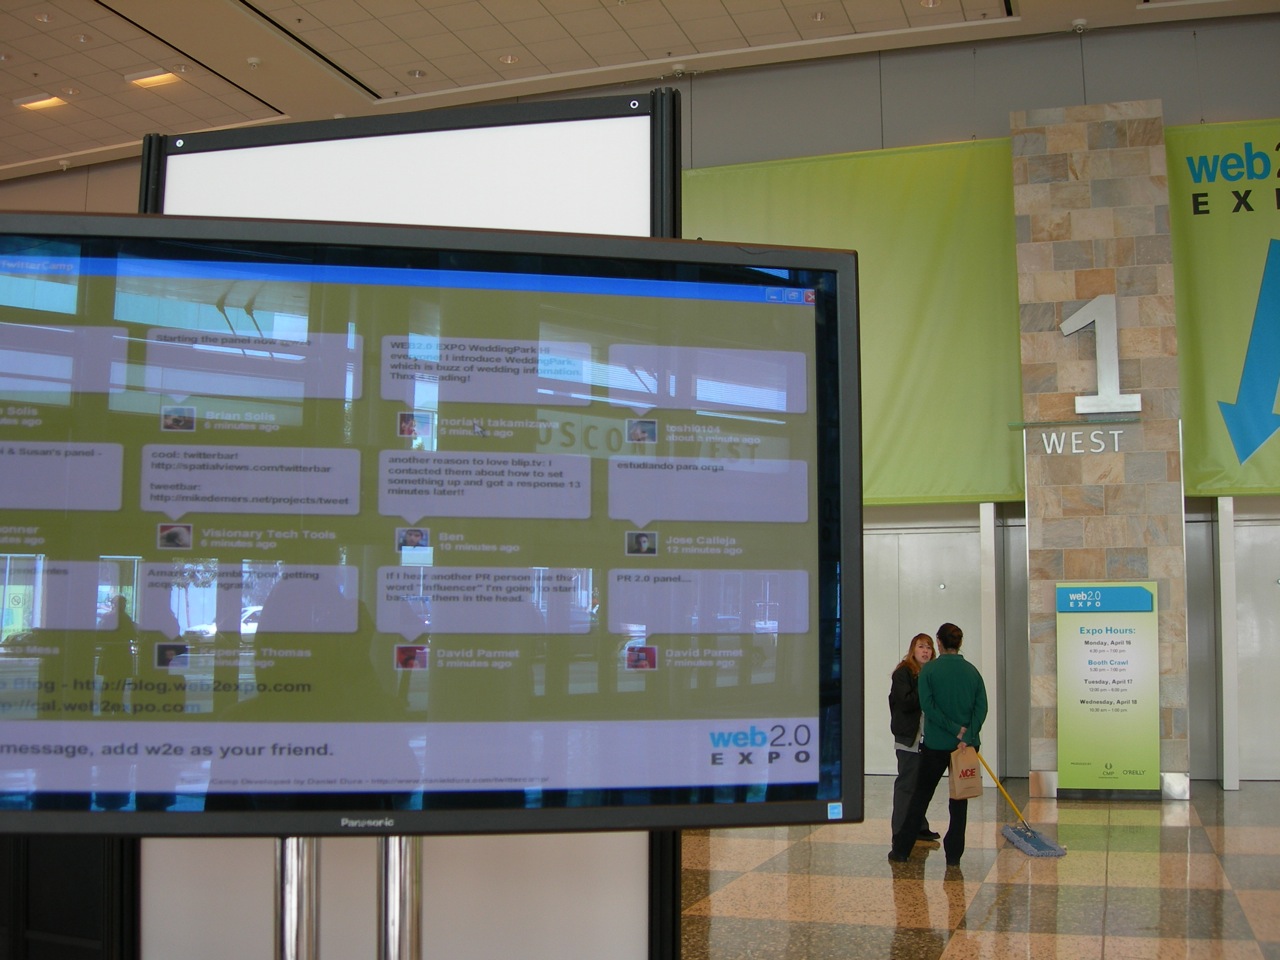 Twitter board at Web 2.0 Expo